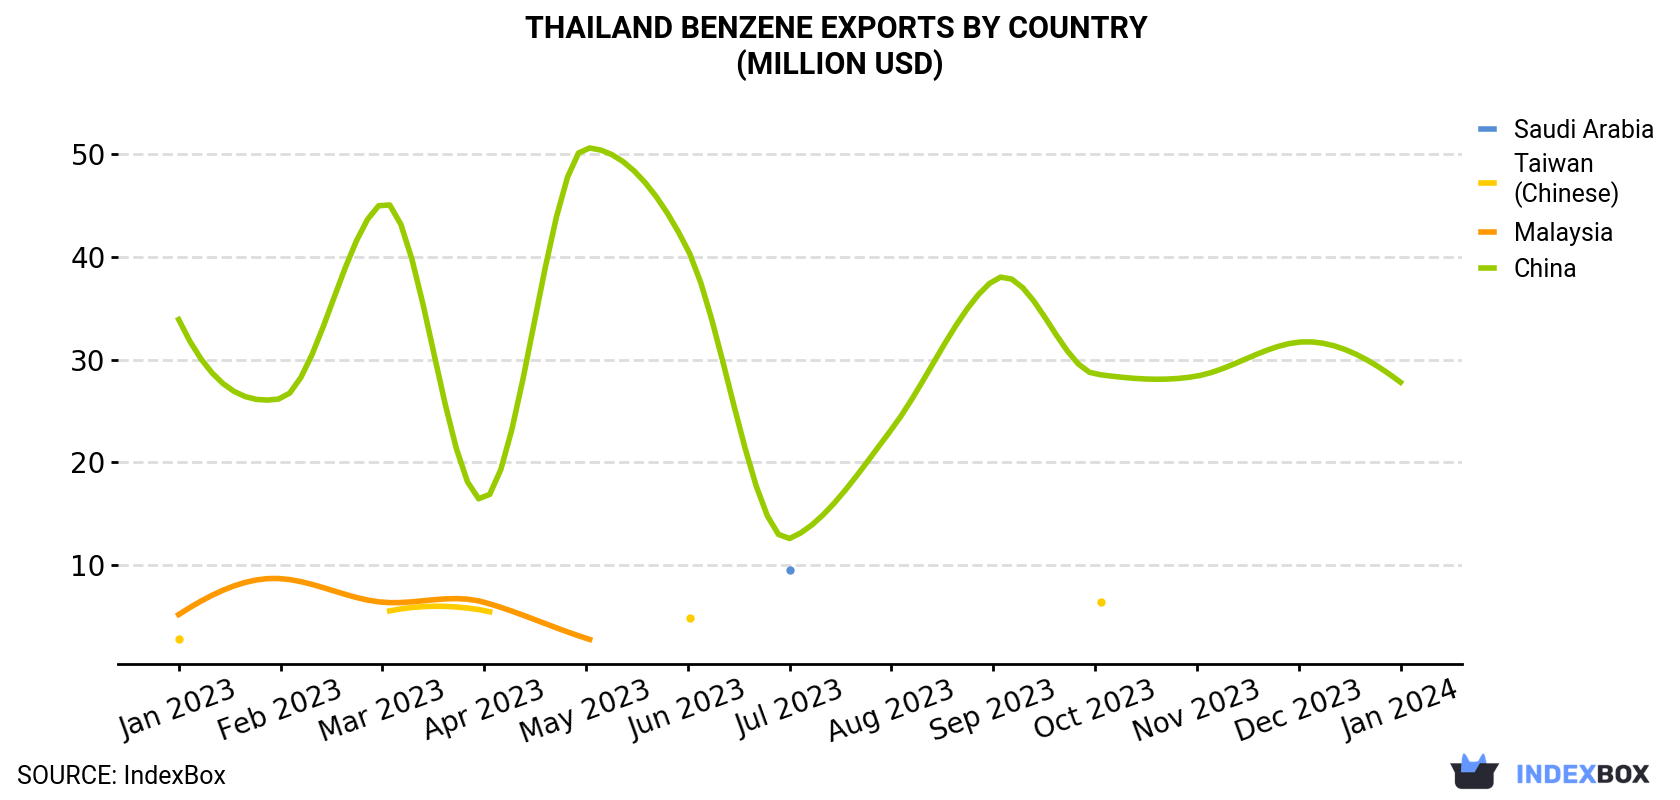 Thailand Benzene Exports By Country (Million USD)